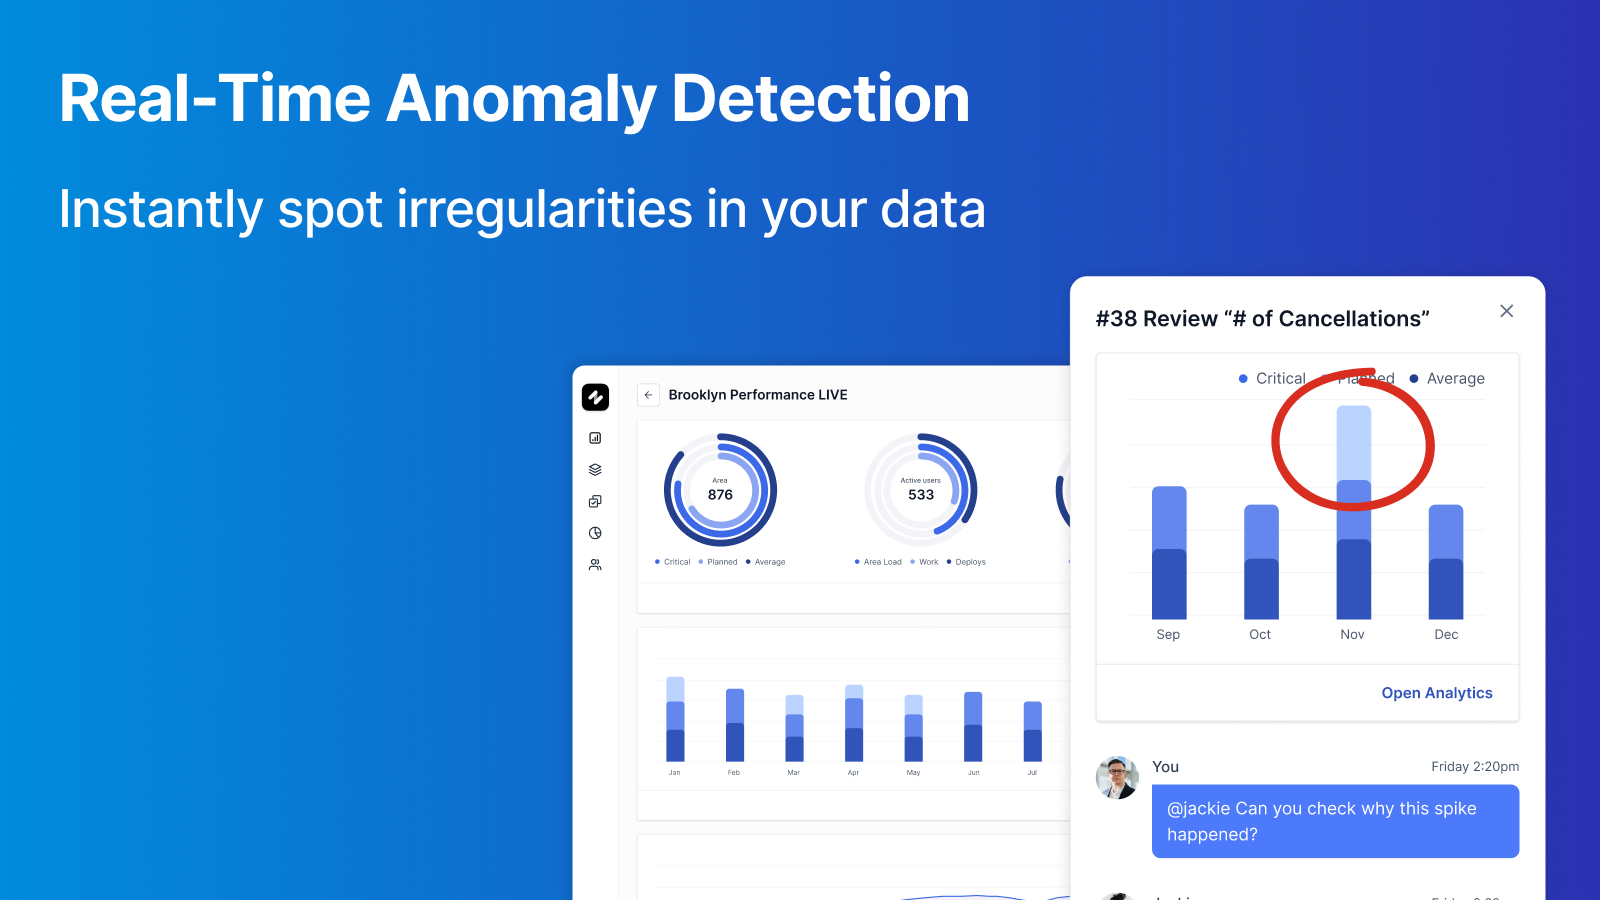 Real-Time Anomaly Detection: Instantly spot irregularities